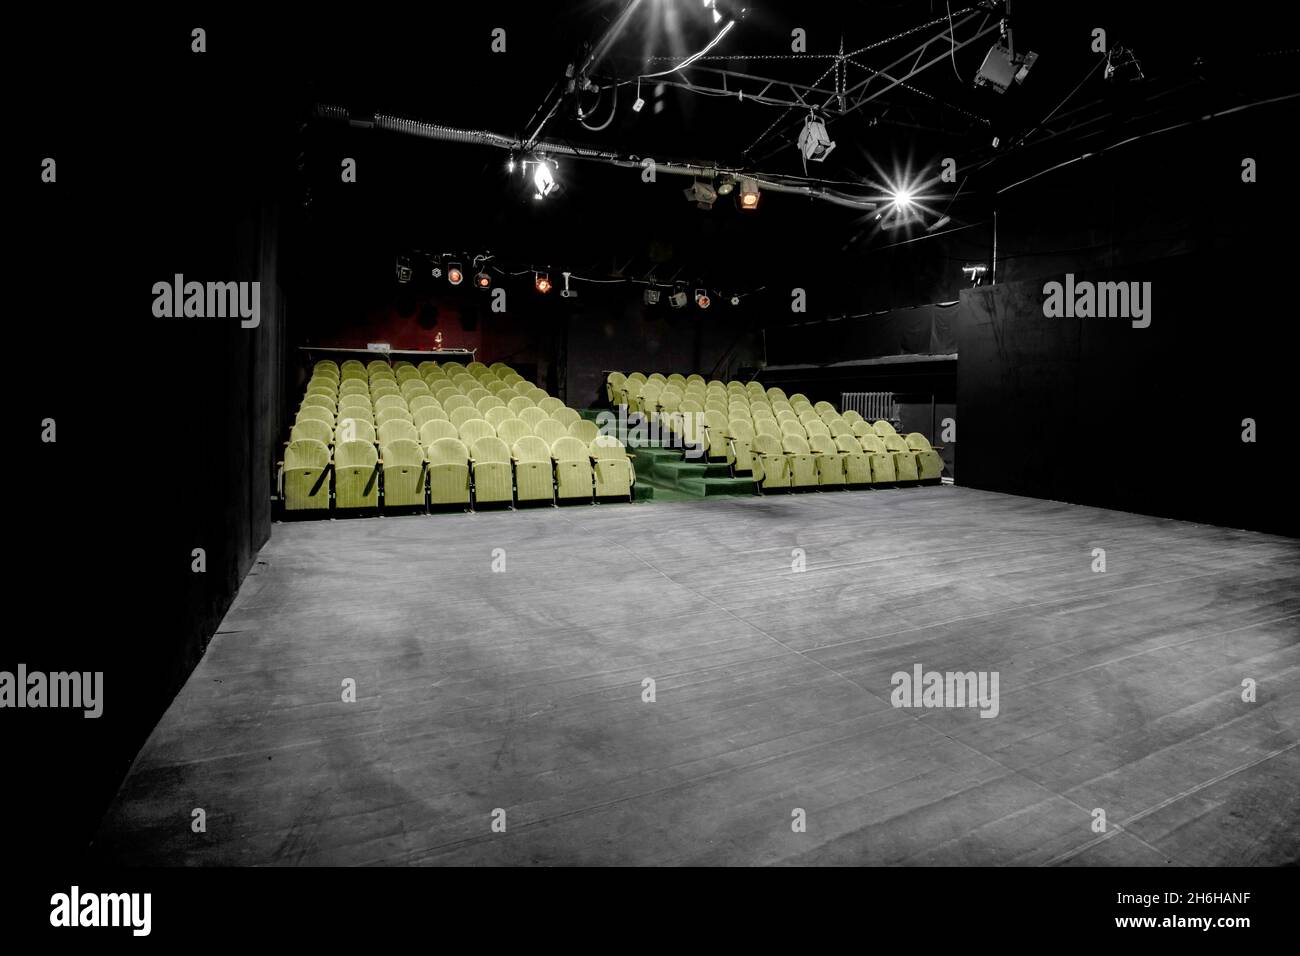 Image of a small auditorium with green armchairs Stock Photo